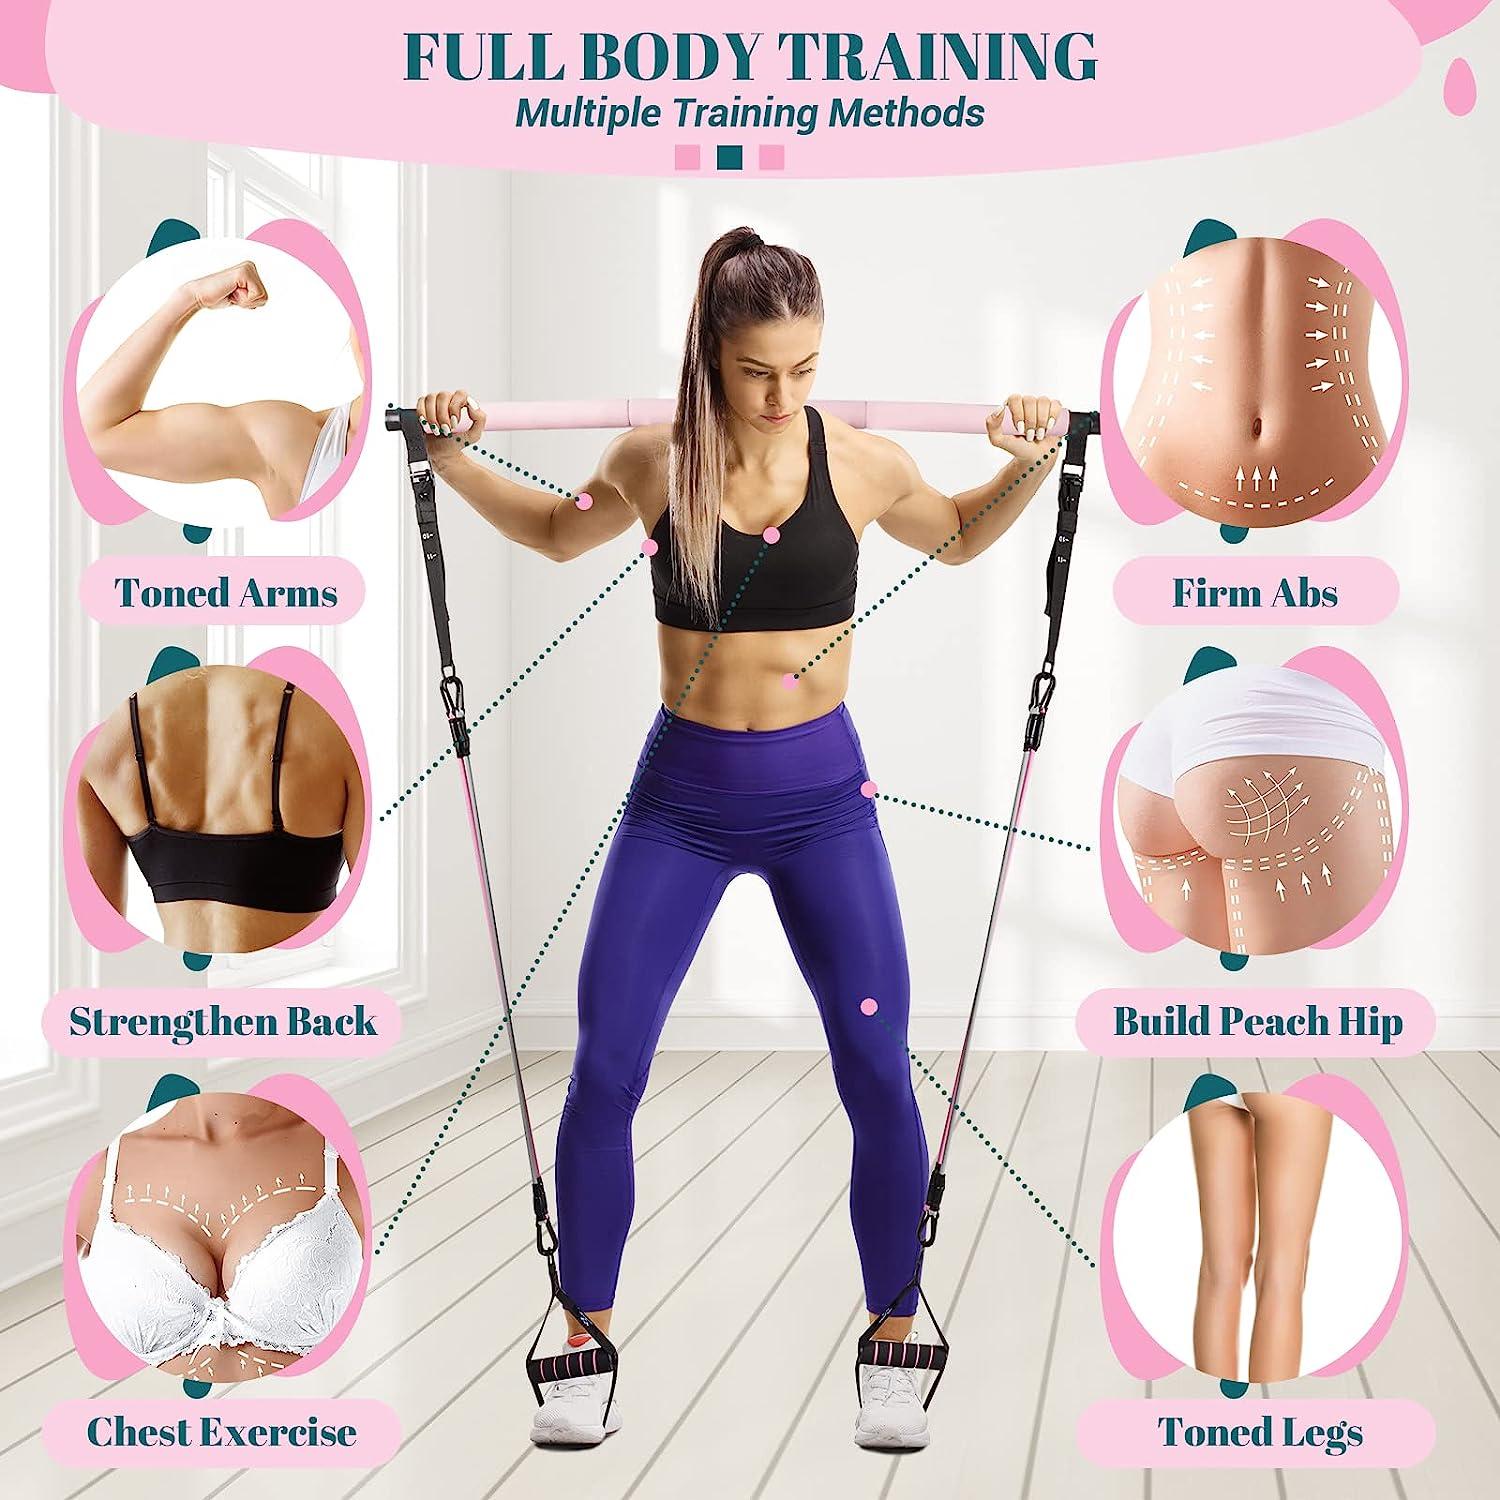 I'm Unlimited® Pilates Bar Kit & Video, 6 to 12 Resistance Bands, Pilates  Reformer, Workout Equipment Home Gym, Portable Exercise Full Body, Fitness  Stick,Yoga Toning Abs Arms & Legs,Booklet : : Sports